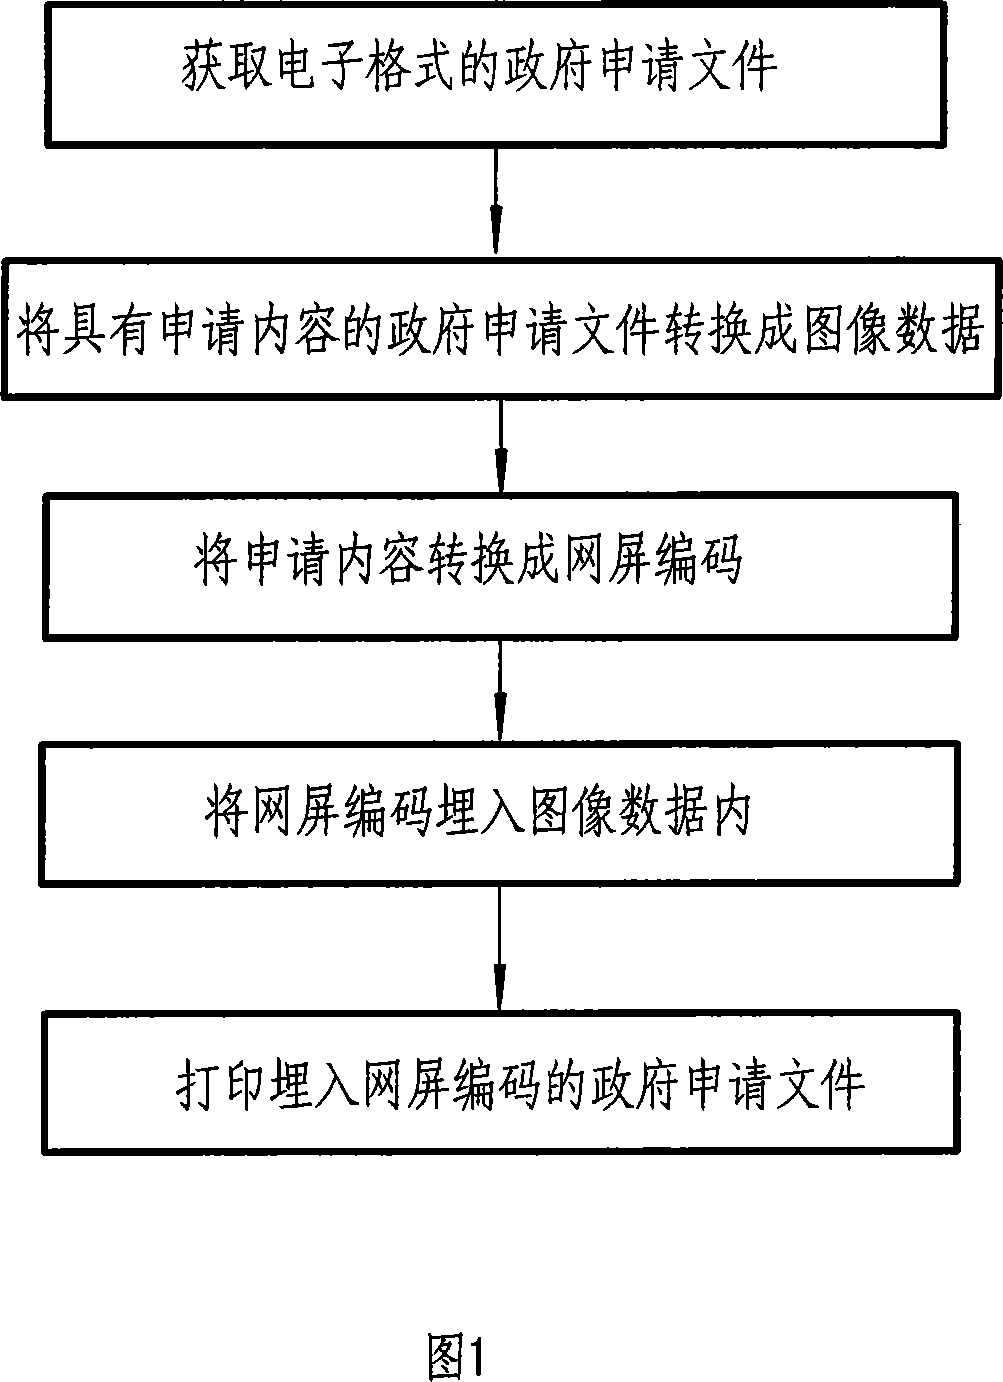 Method for embedding government application file content in paper medium